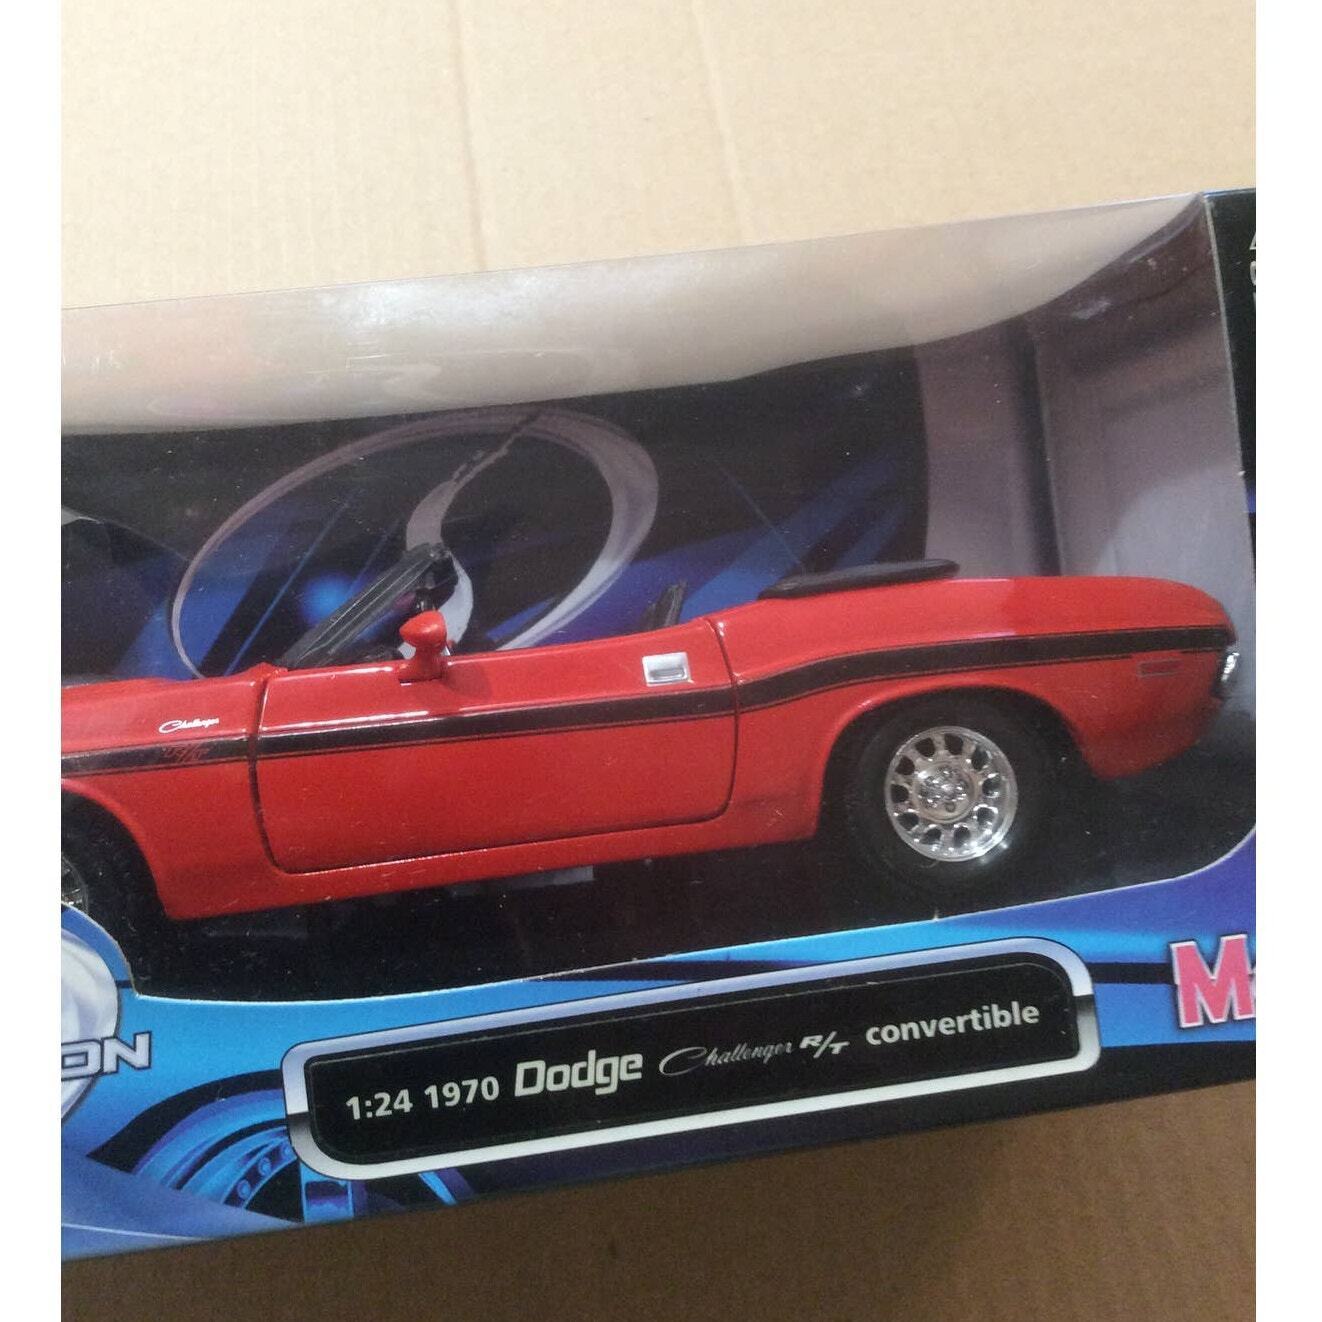 New Maisto Special Edition  1970 Red Dodge Convertible Model Car NIB challenger